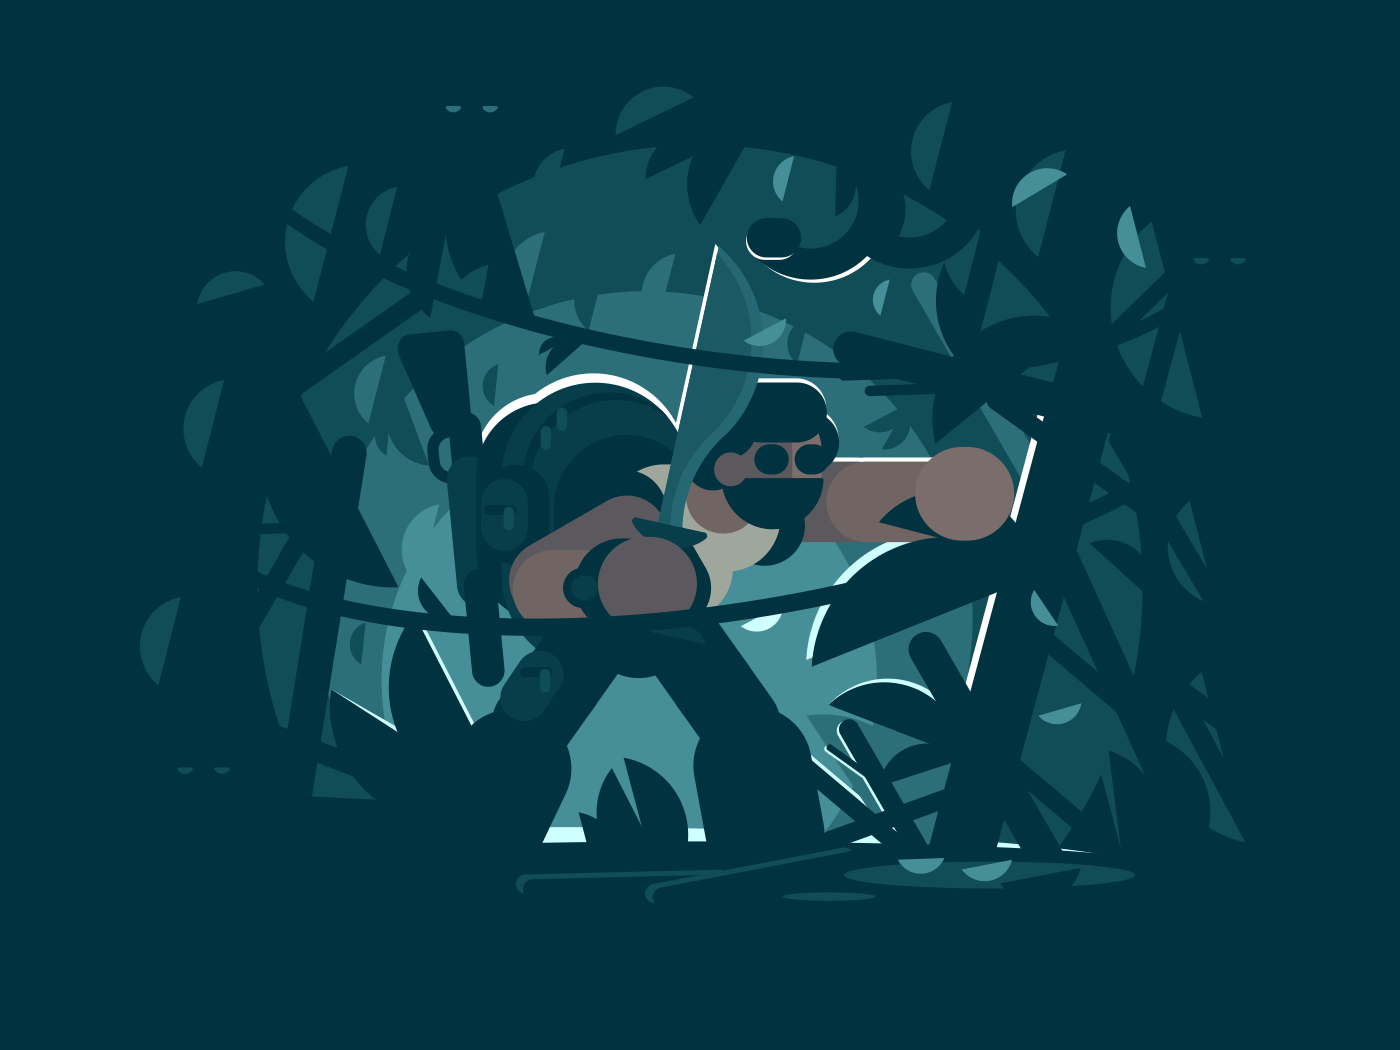 Traveler in jungle. Man with rucksack and rifle, chopping creepers in woods. Vector illustration